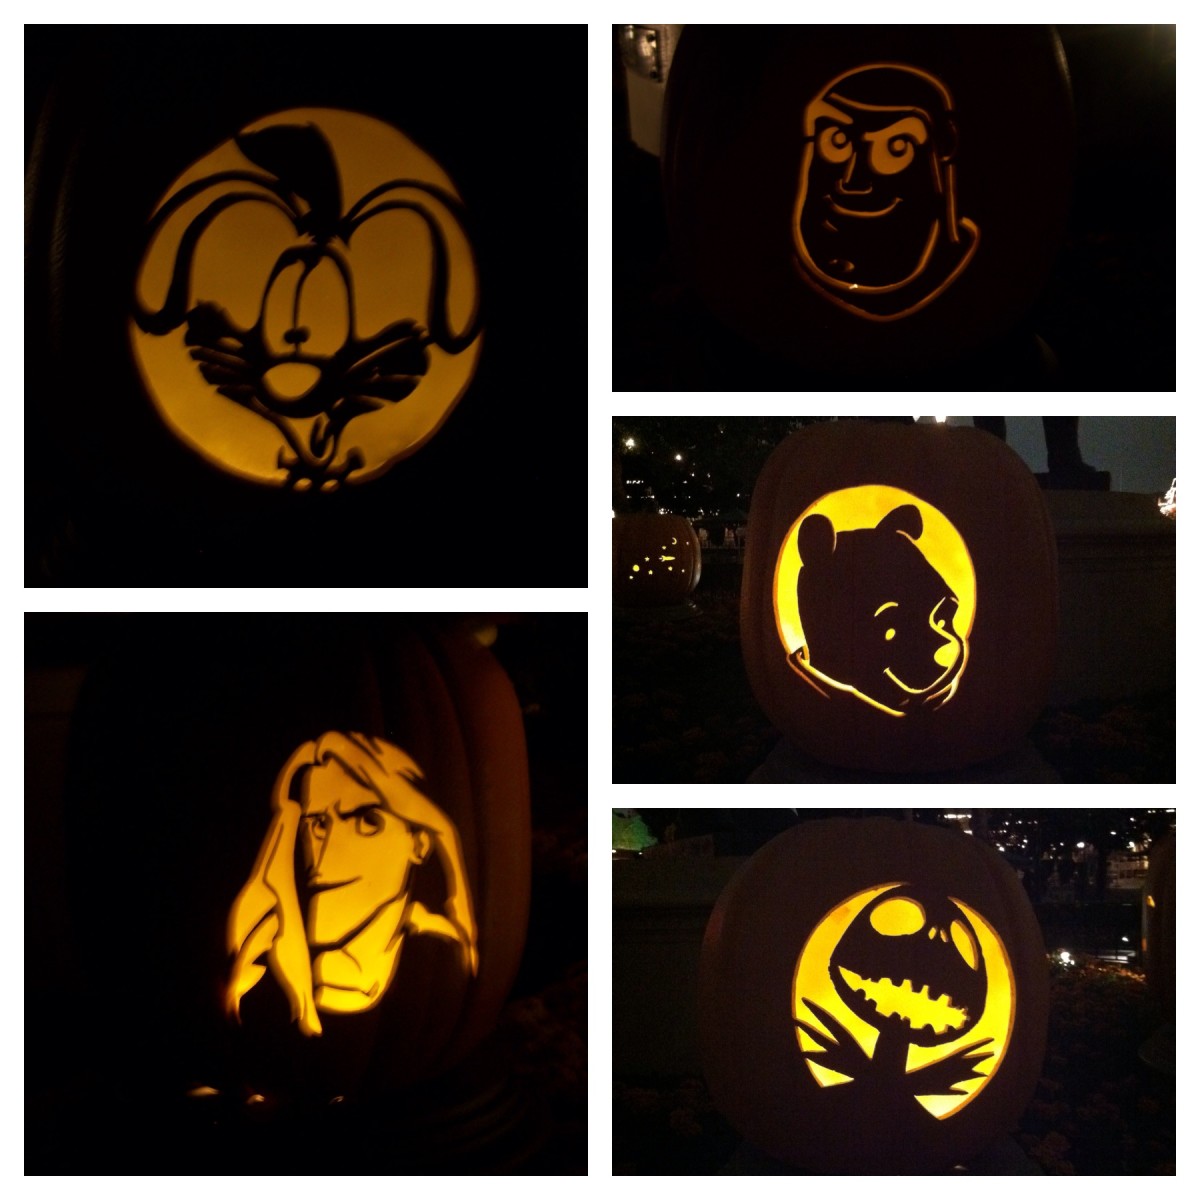 Some jack-o-lanterns are carved as famous Disney characters